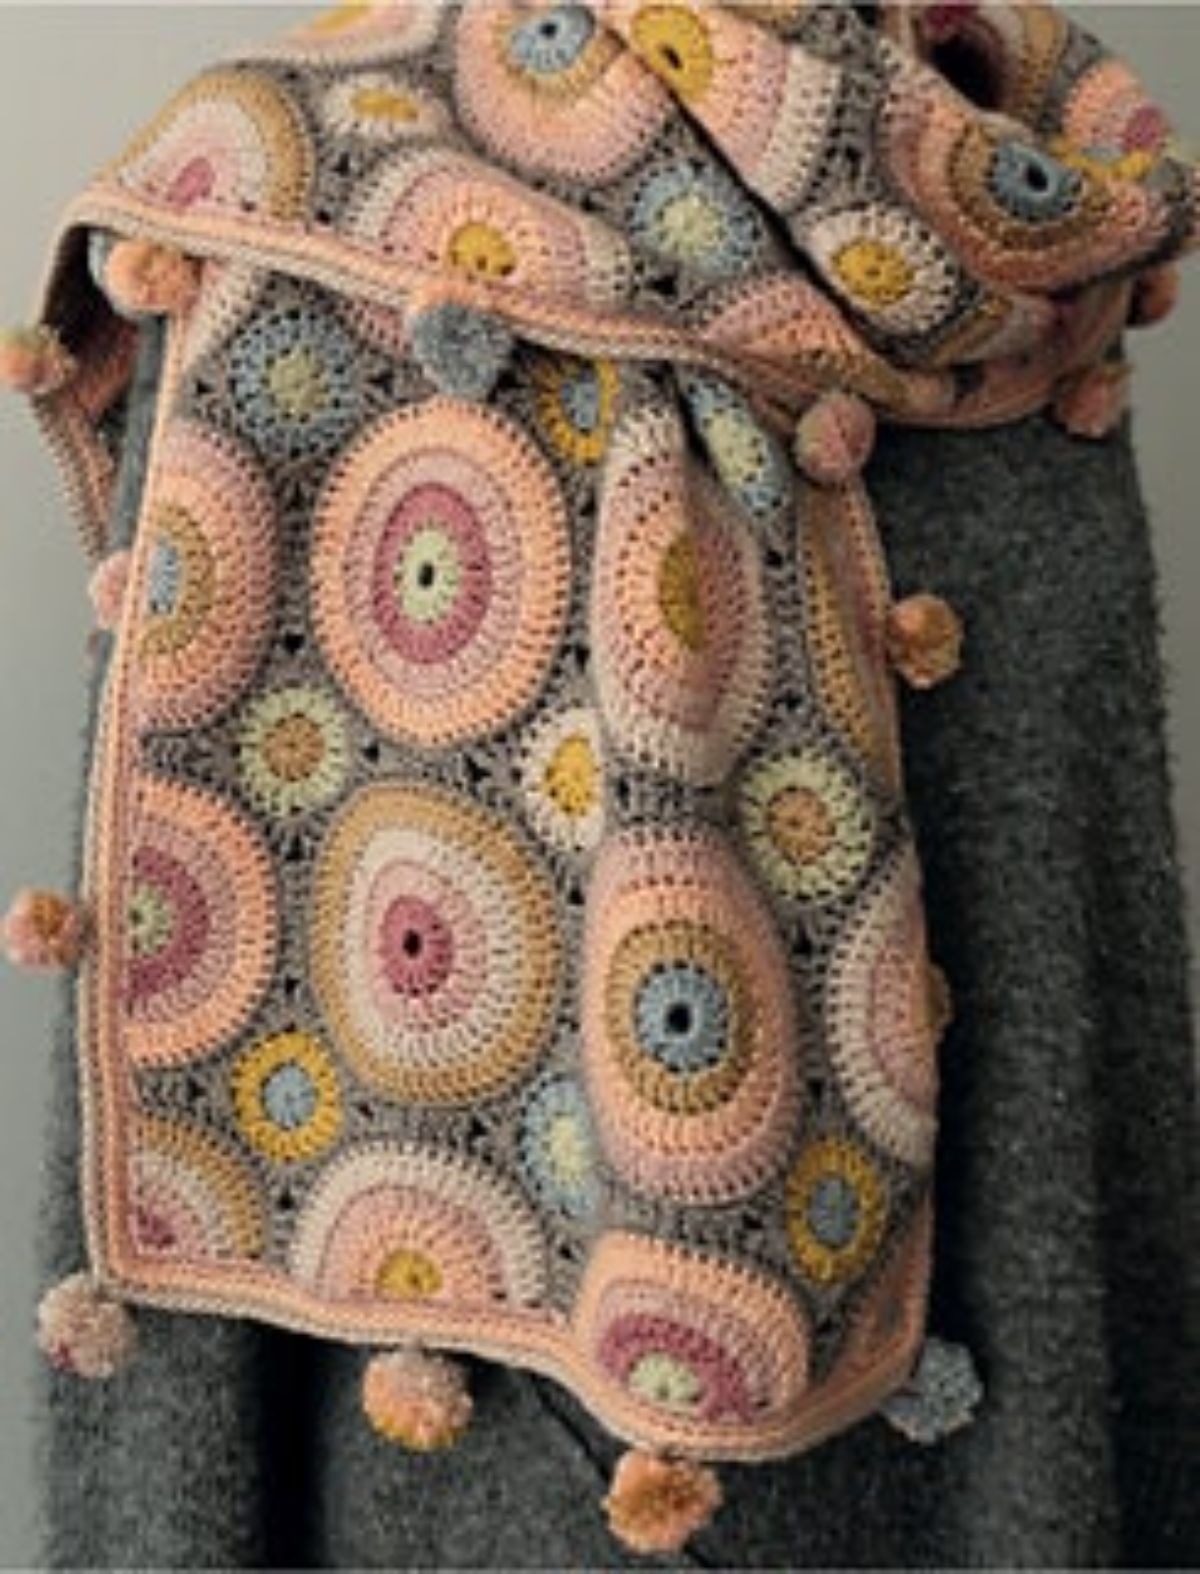 Gray scarf featuring pink, blue, yellow, and gray crochet circles all over with a pale pink trim and pink and gray pom poms along the edges.